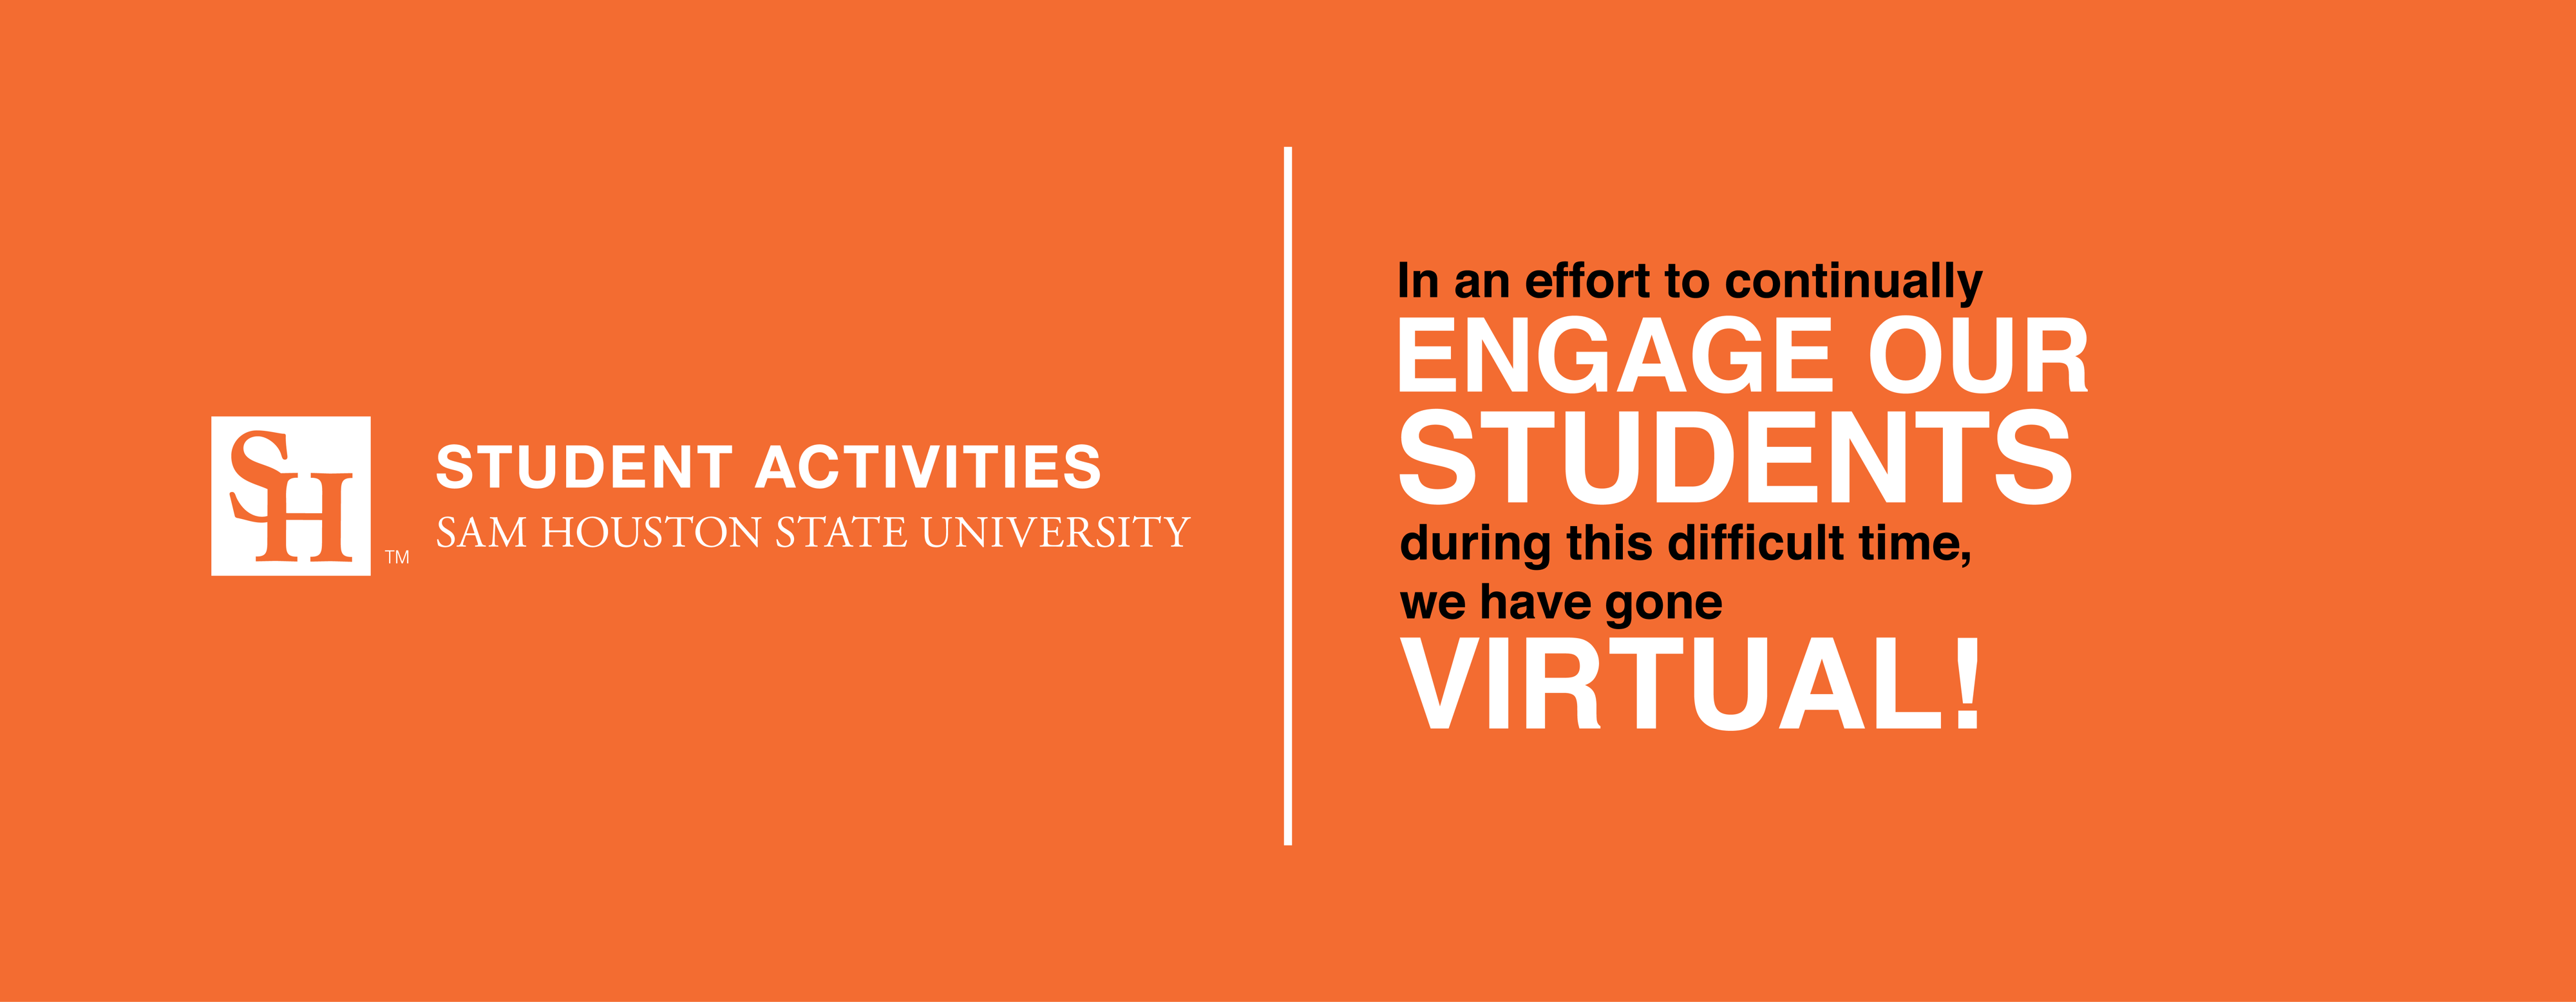 In An effort to continually engage our students during this difficult time, we have gone virtual!